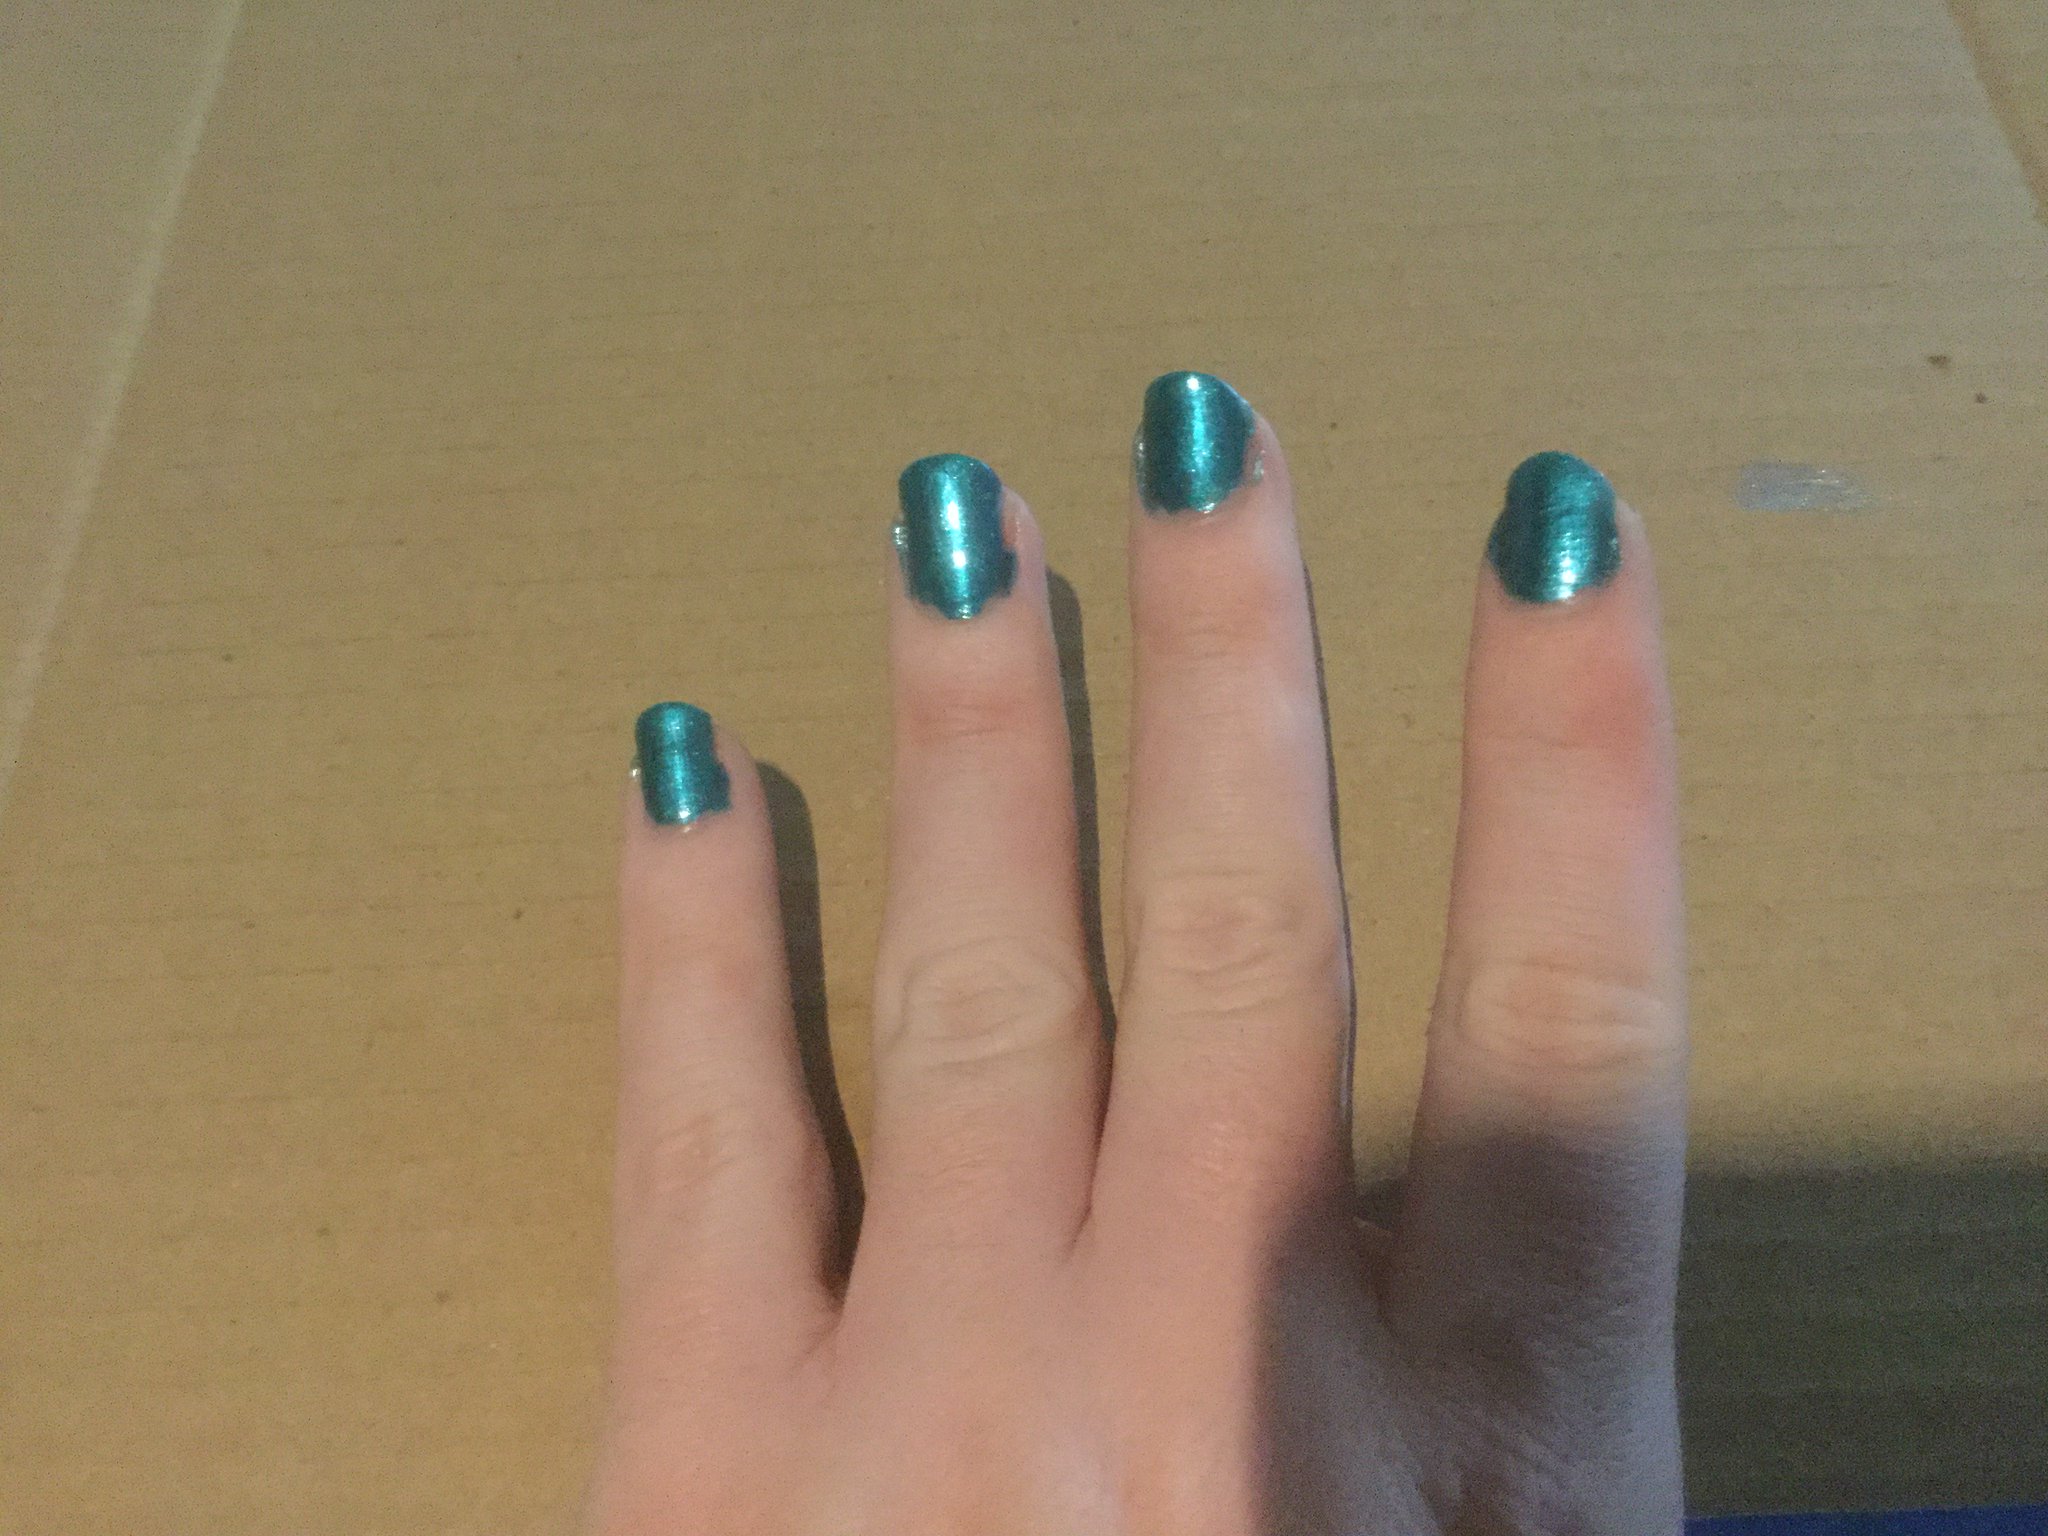 L.A. Colors “Island Dream”, a teal color with a fine glittery texture, subtler than “Mermaid”.